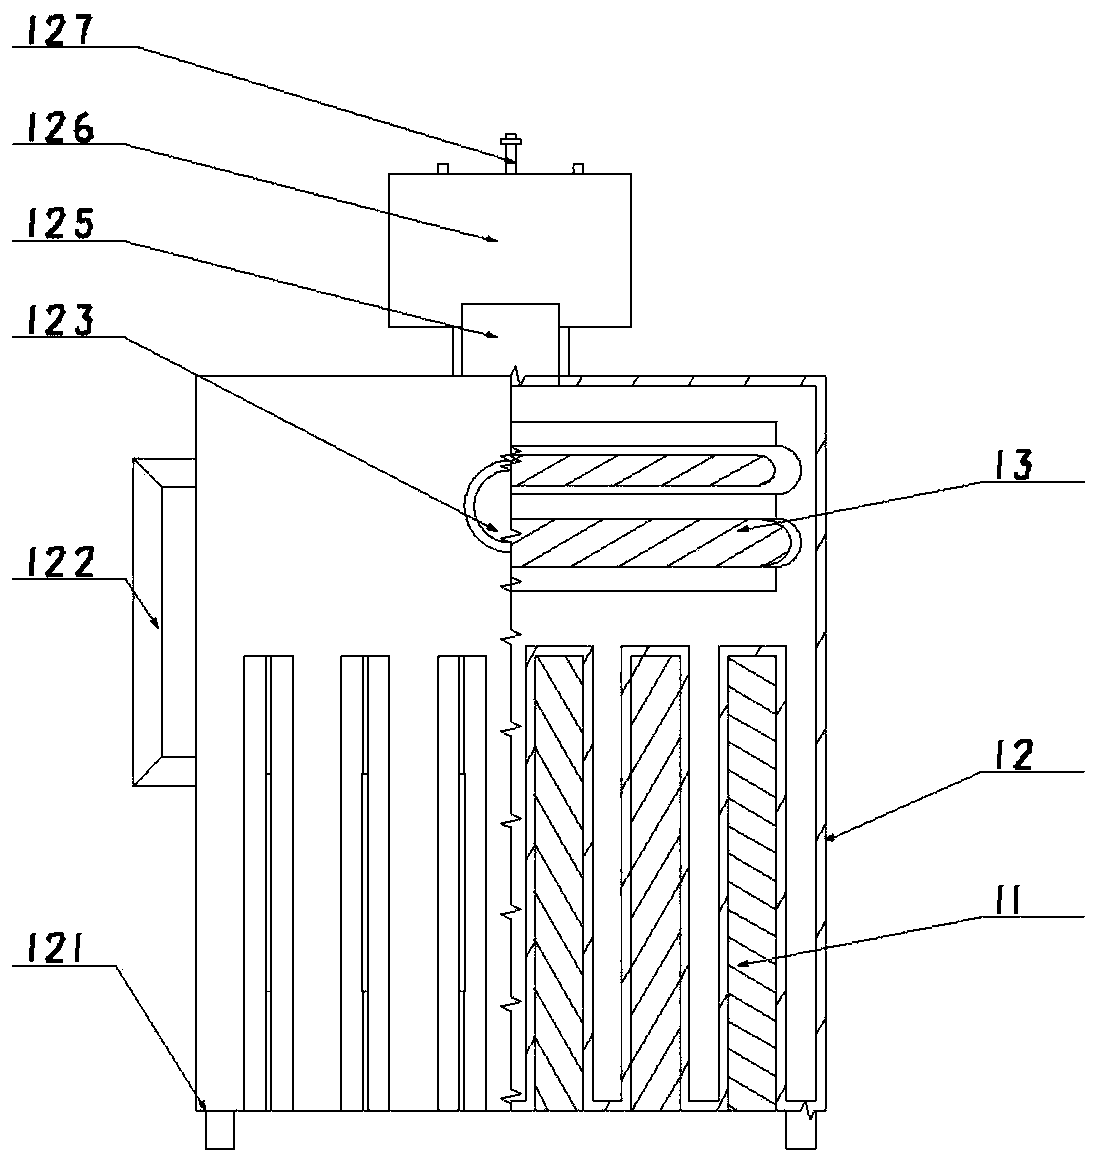 Liquid cooling assisted phase-change material heat exchange battery thermal management system